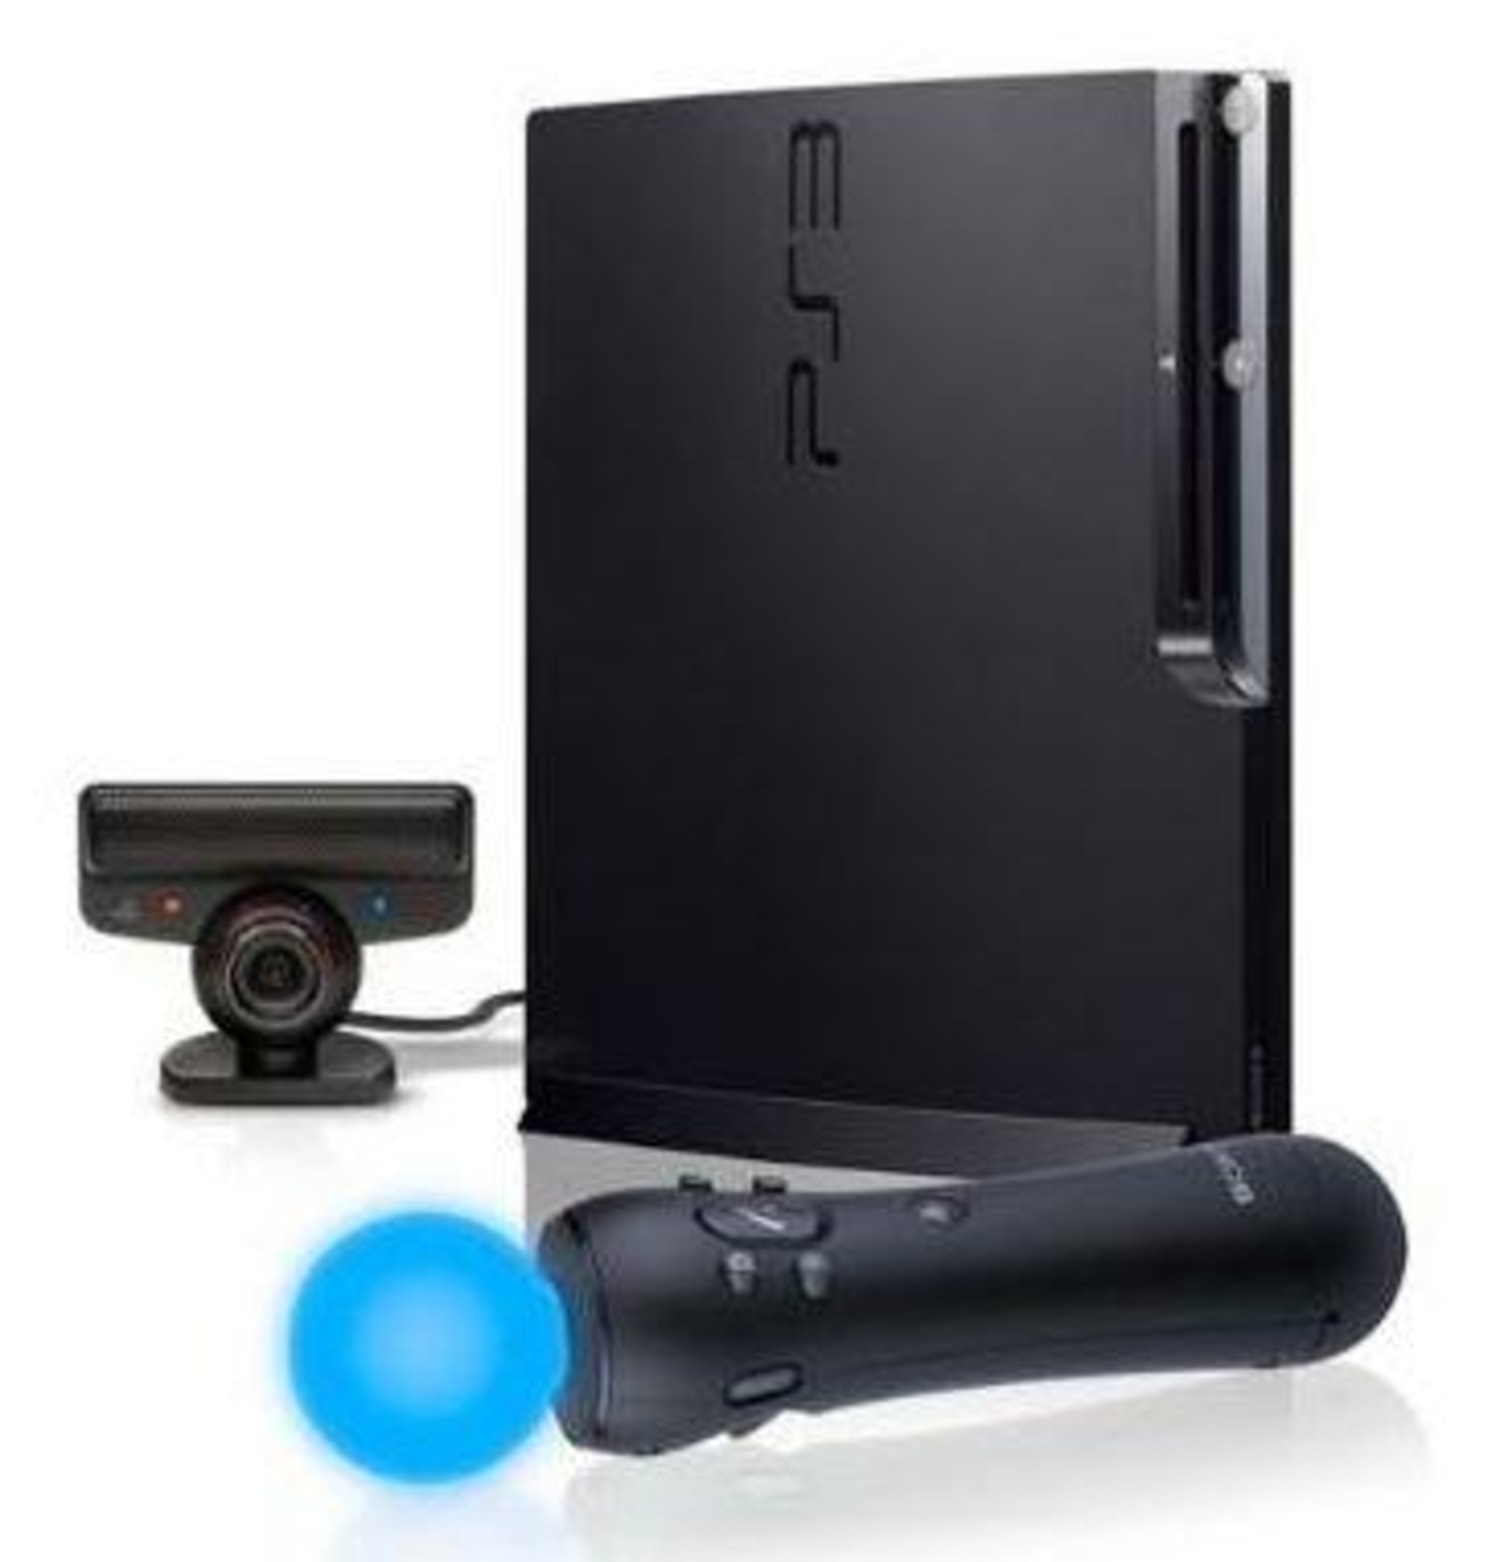 A new PlayStation  with Kinect controls?